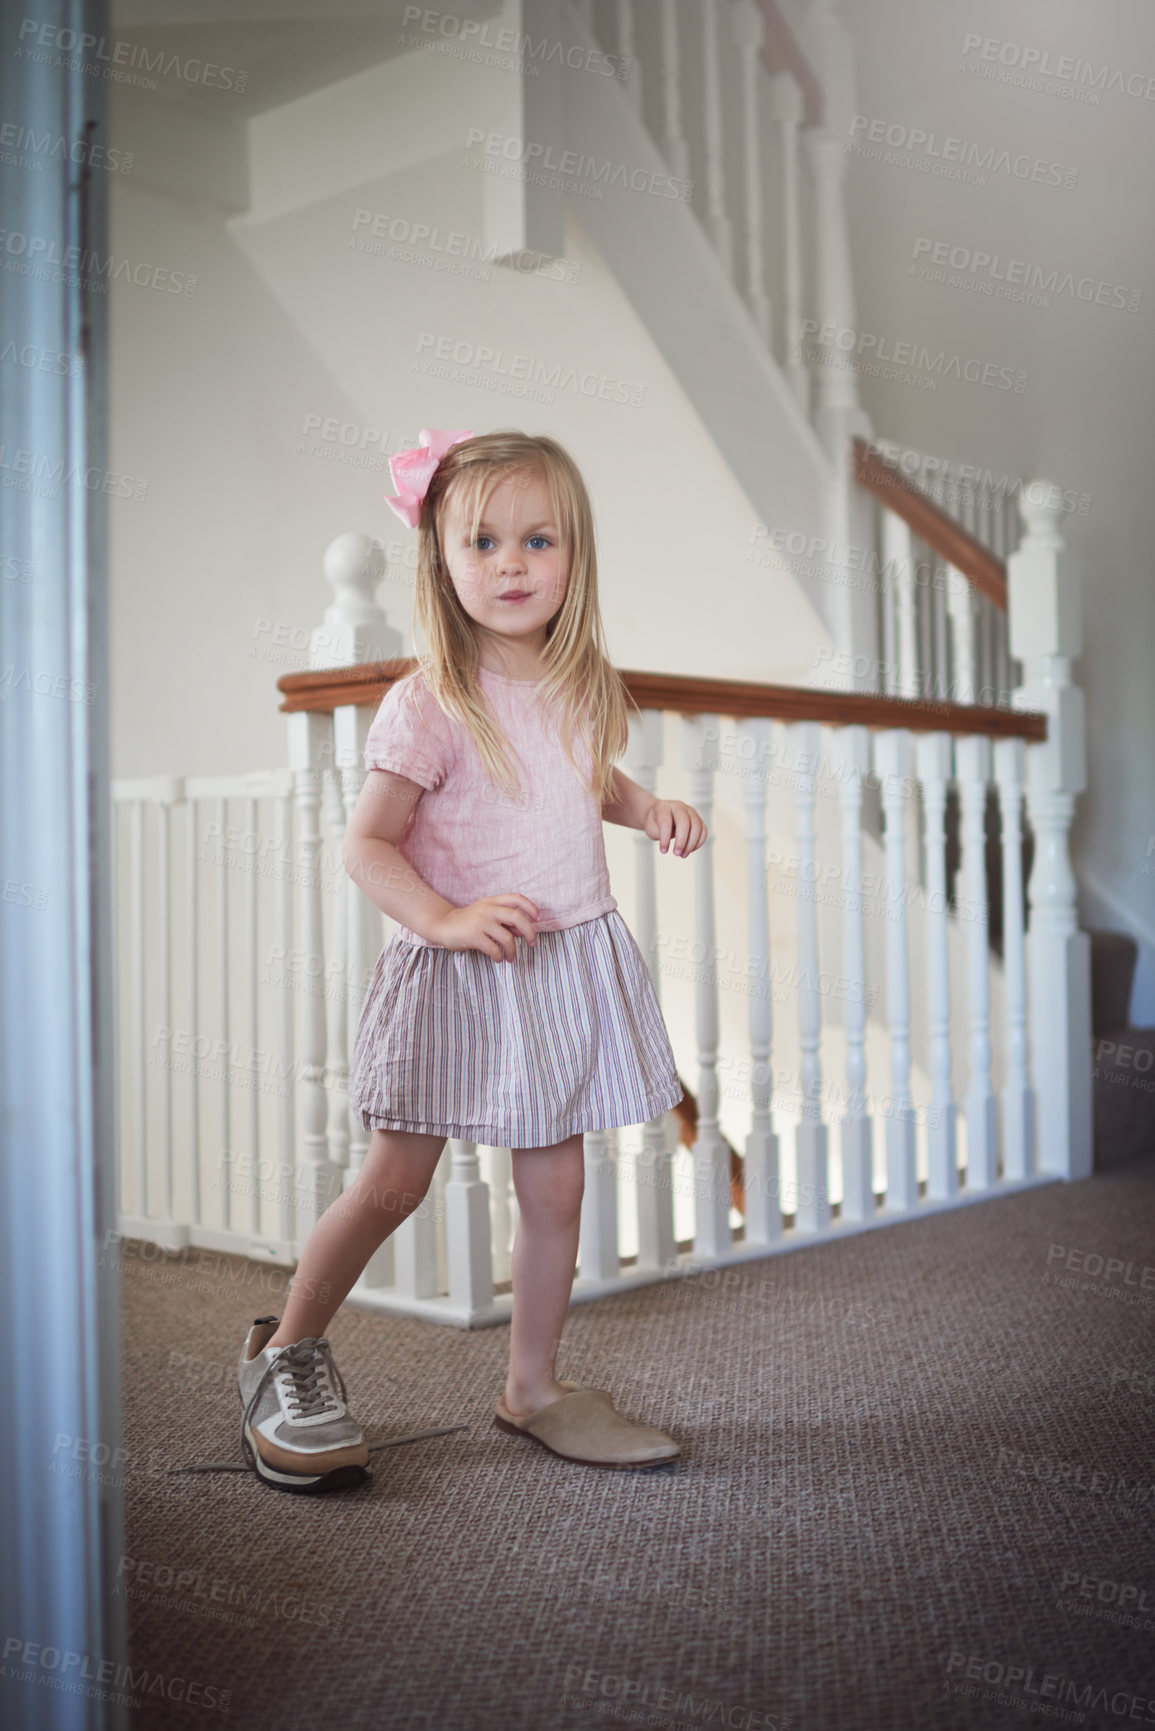 Buy stock photo Shot of an adorable little girl walking around the house in grown up shoes